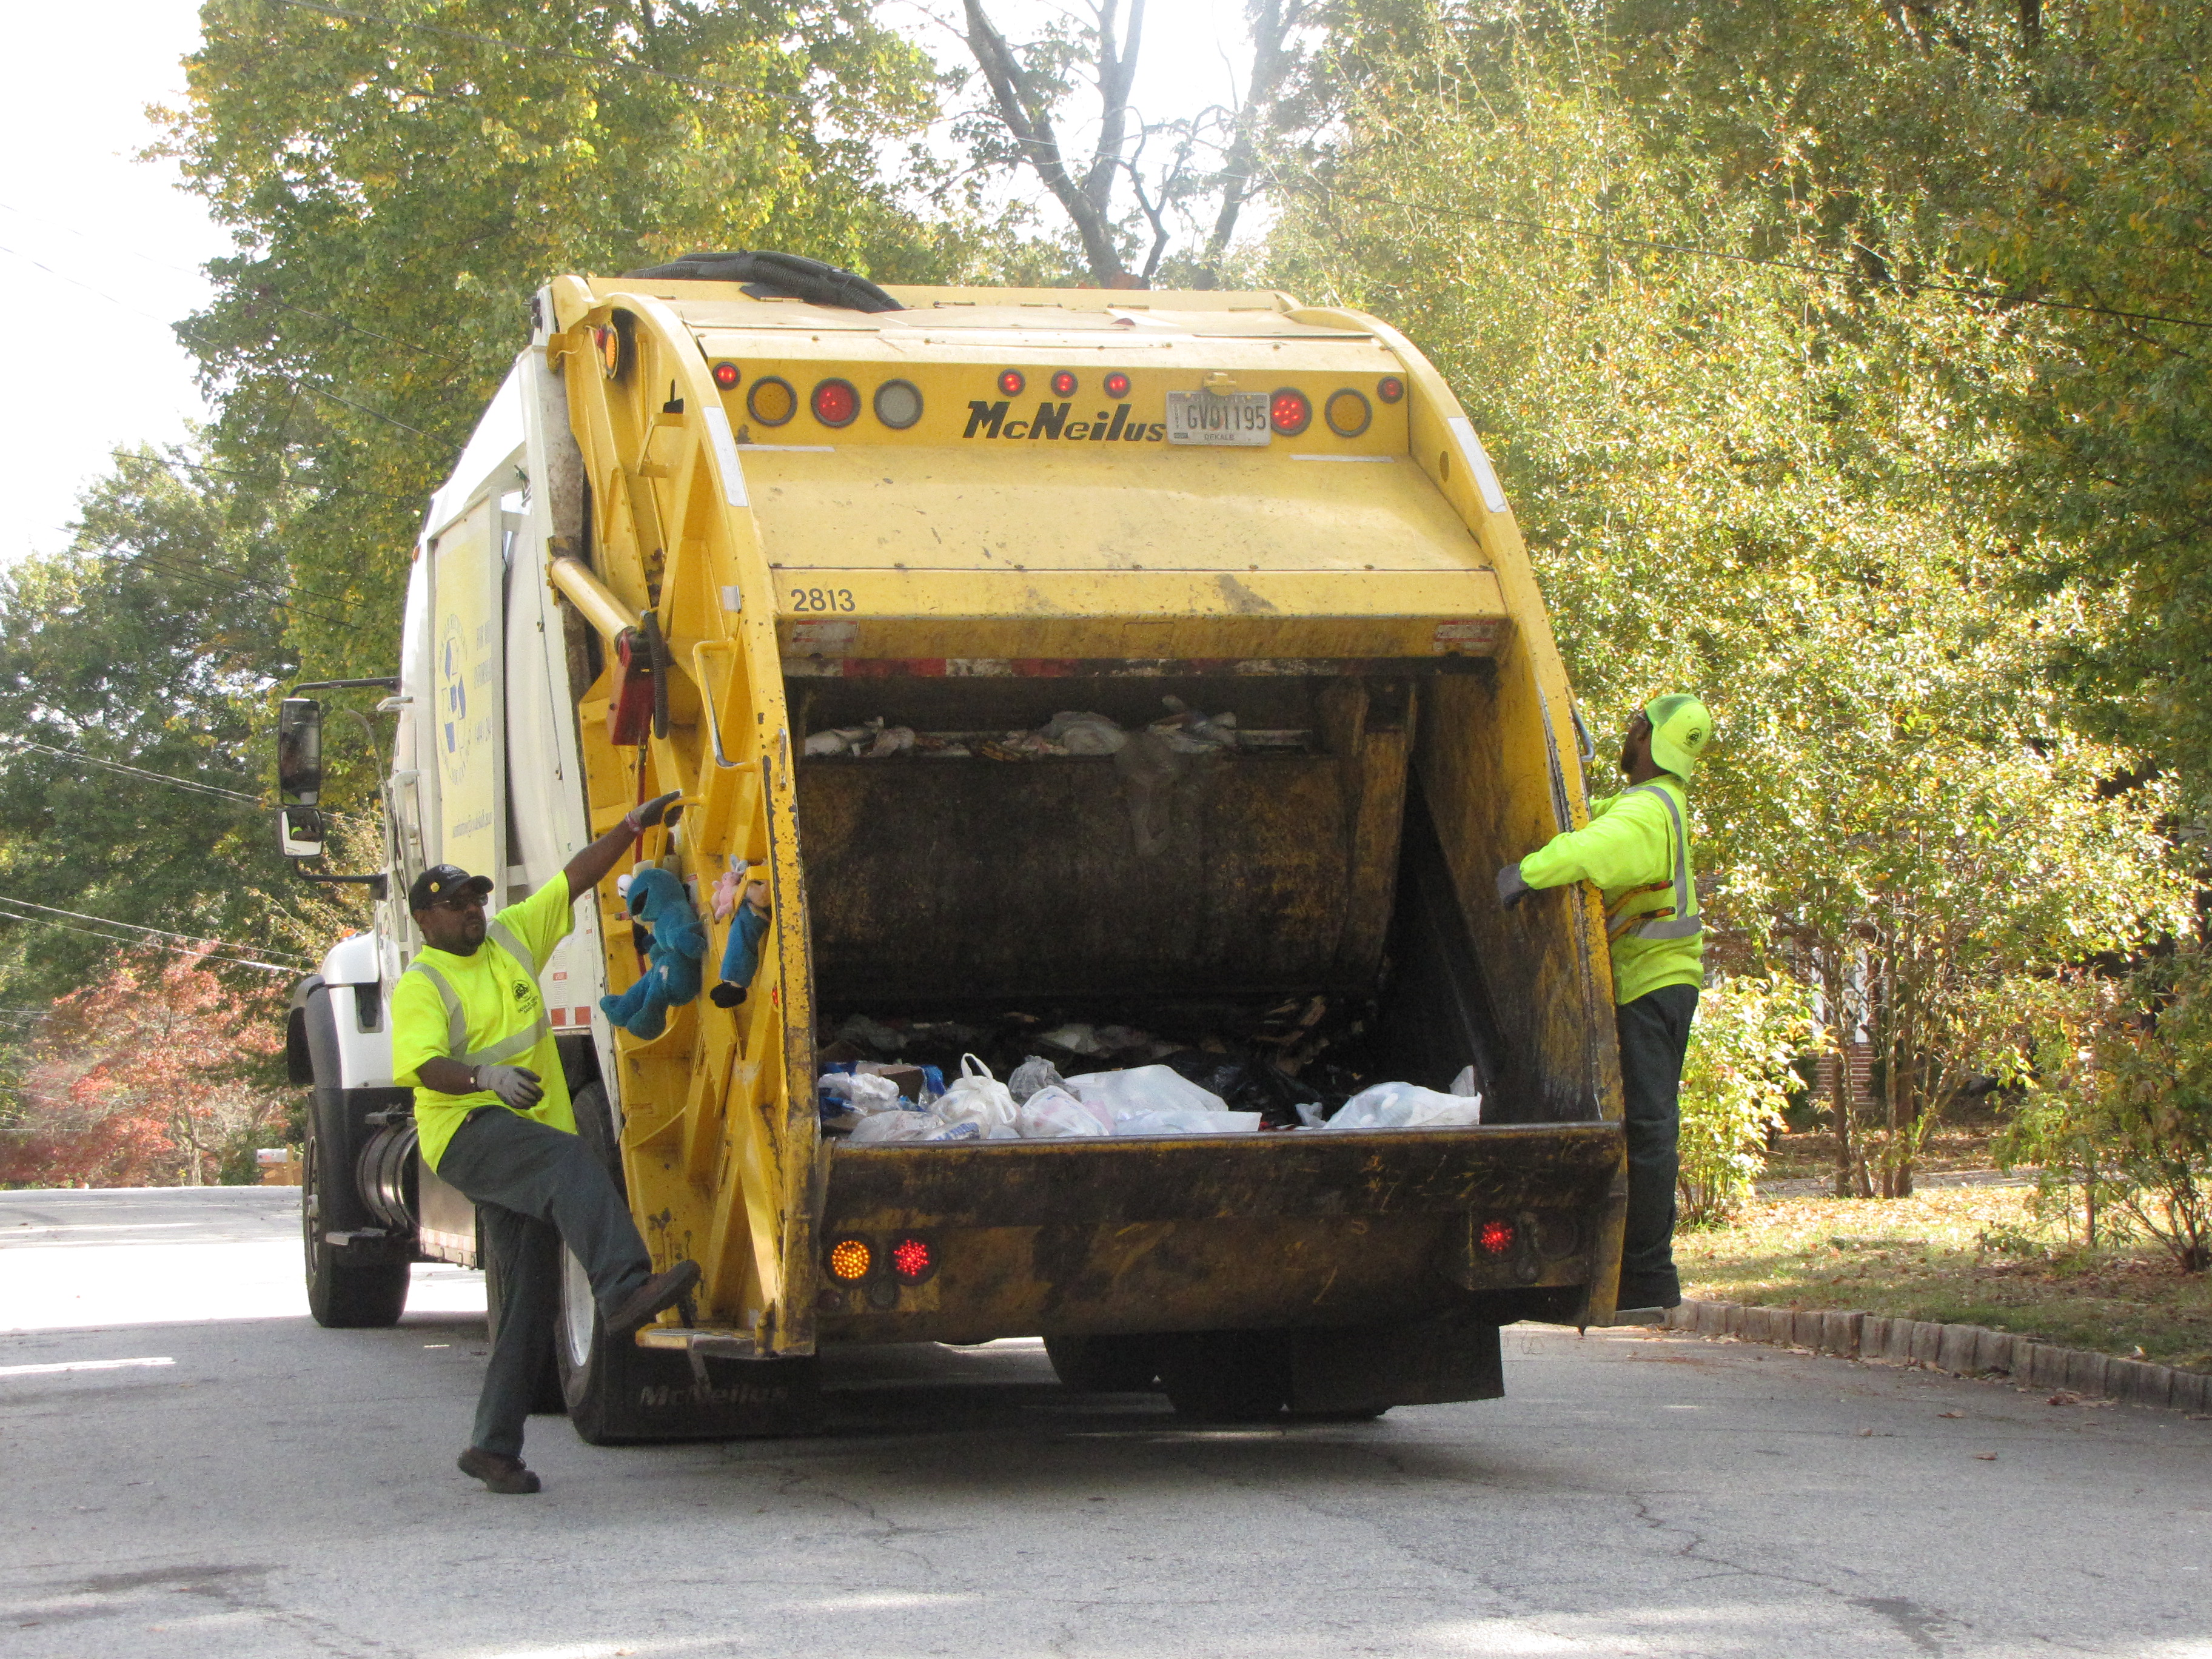 Sanitation workers collect refuse.